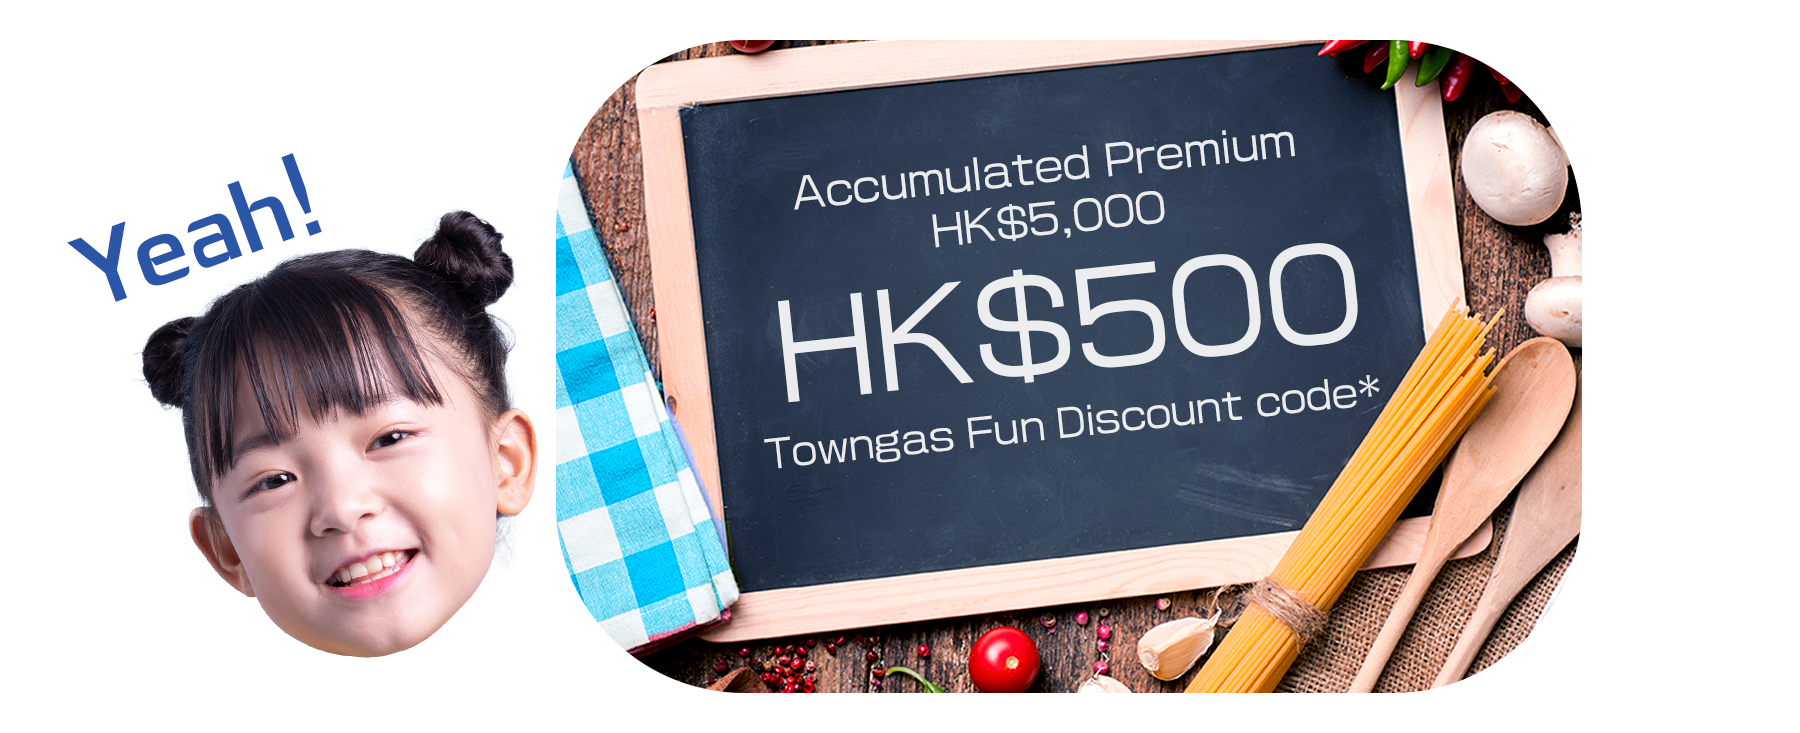 Successfully enroll Blue Cross products with specific accumulated premiums could earn Towngas Fun discount codes.